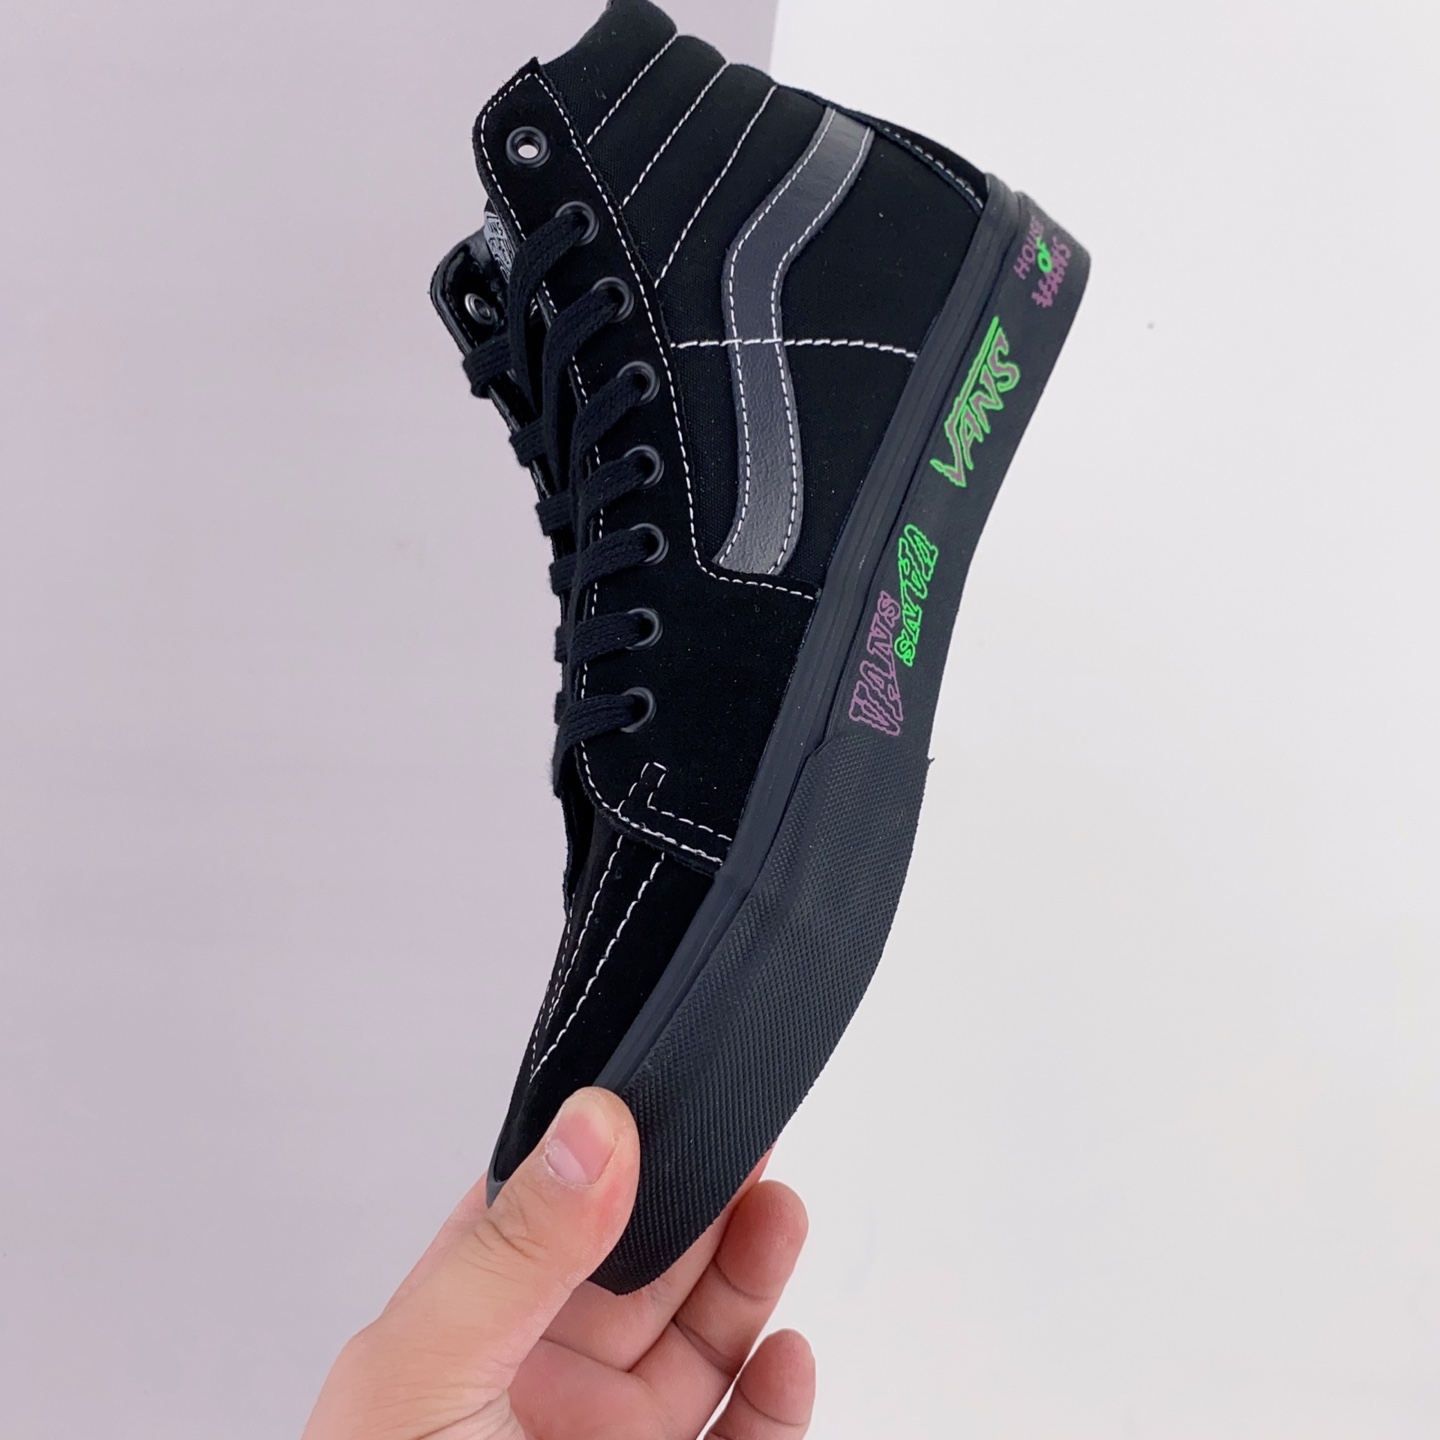 Vans SK8-HI Black Green Sneakers - Latest Release | Limited Edition